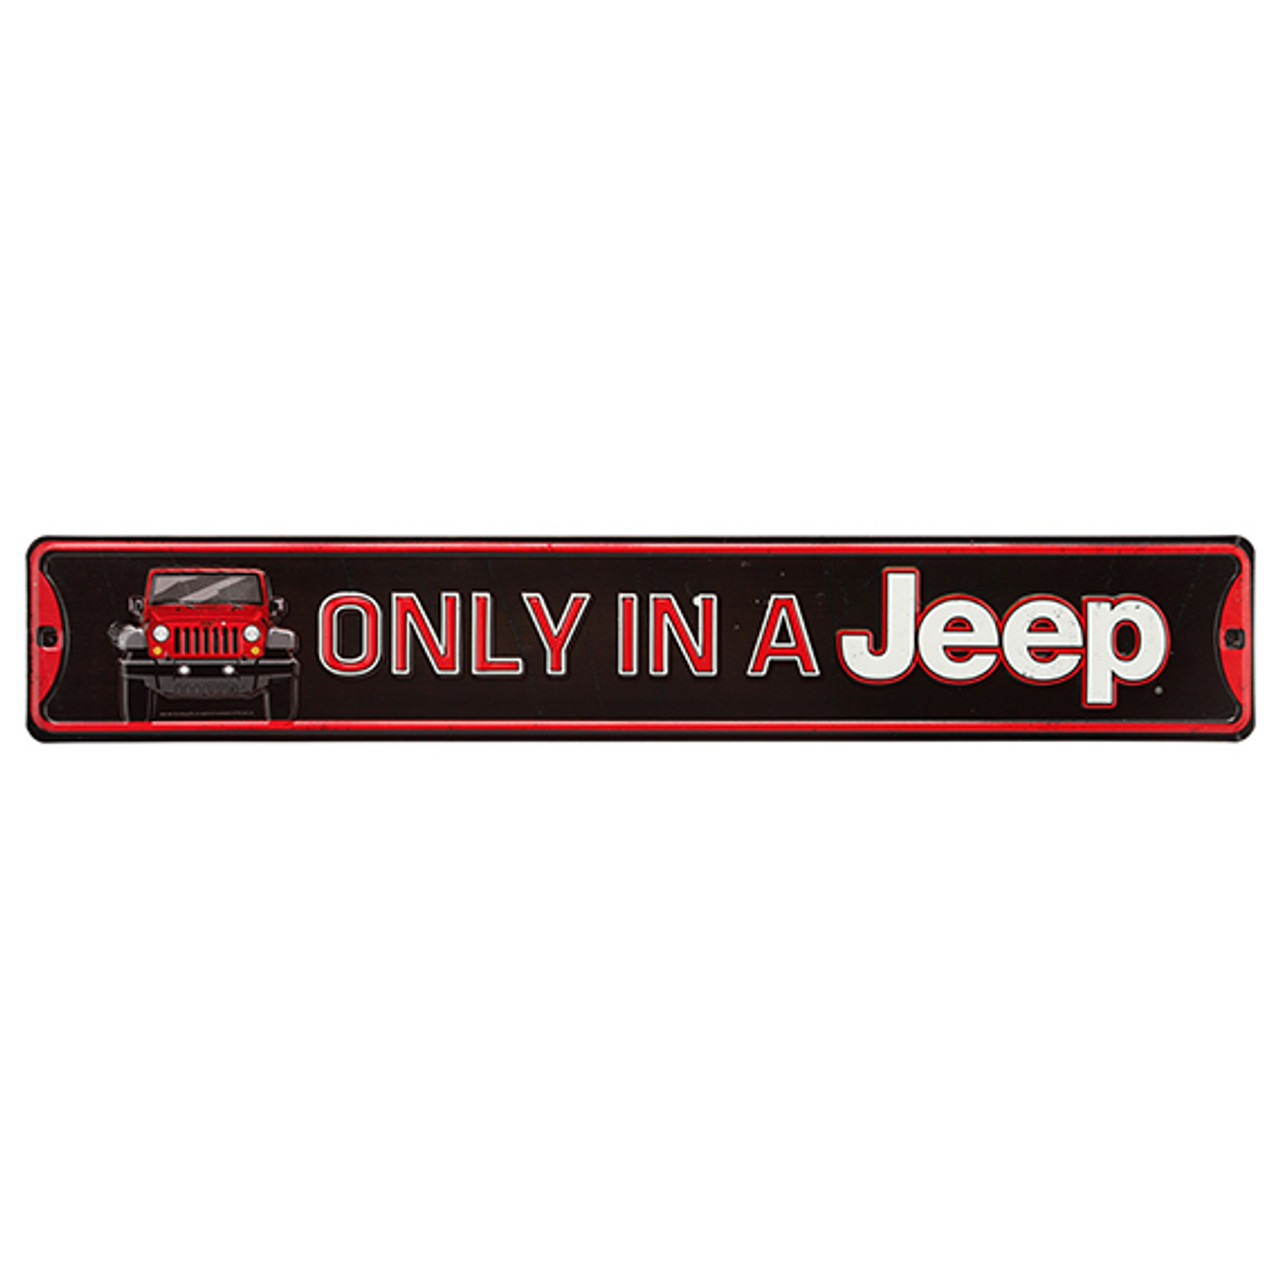 ONLY IN A JEEP EMBOSSED TIN STREET SIGN